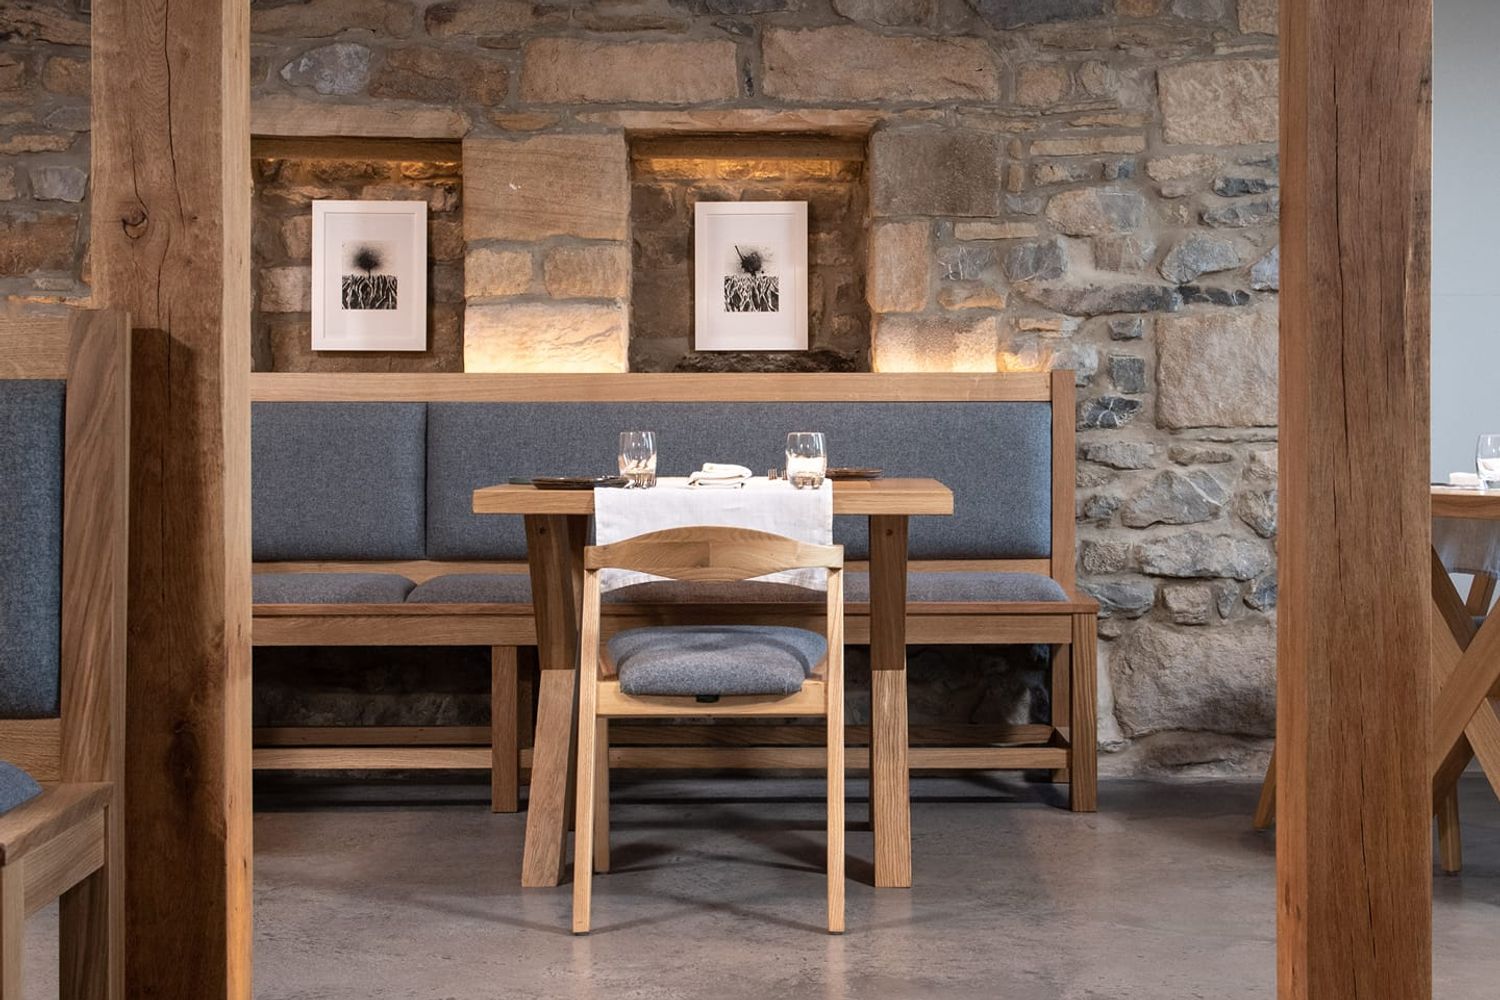 Wooden furniture and grey padded seating make up the trendy seating for diners. Out of shot, there are wooden framed windows where guests can admire views over the Yorkshire Dales.